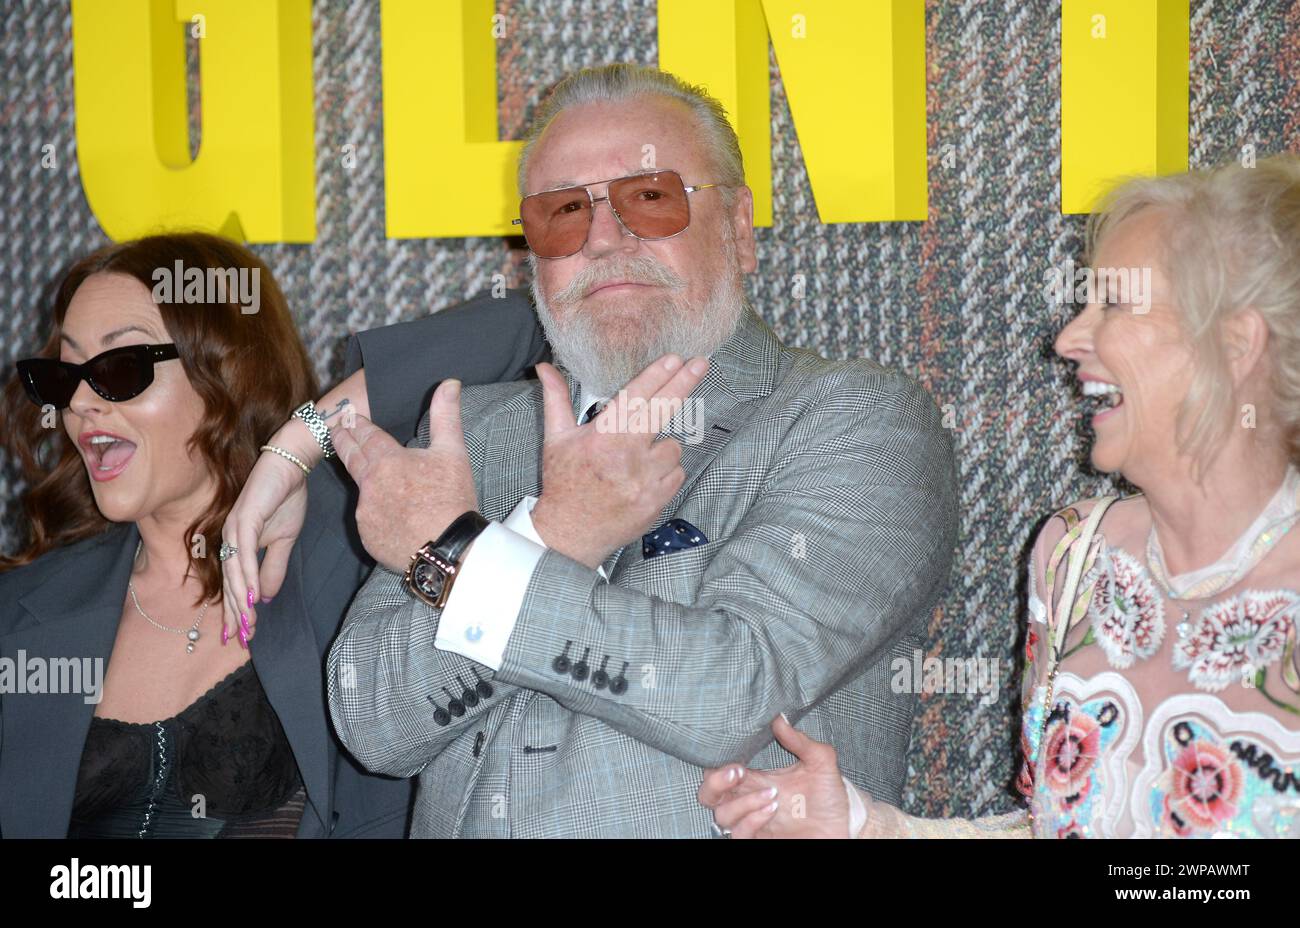 Photo Must Be Credited ©Alpha Press 078237 05/03/2024 Jaime Winstone Ray Winstone and Wife  Elaine at the UK TV Series Global Premiere of The Gentlemen in London. Stock Photo